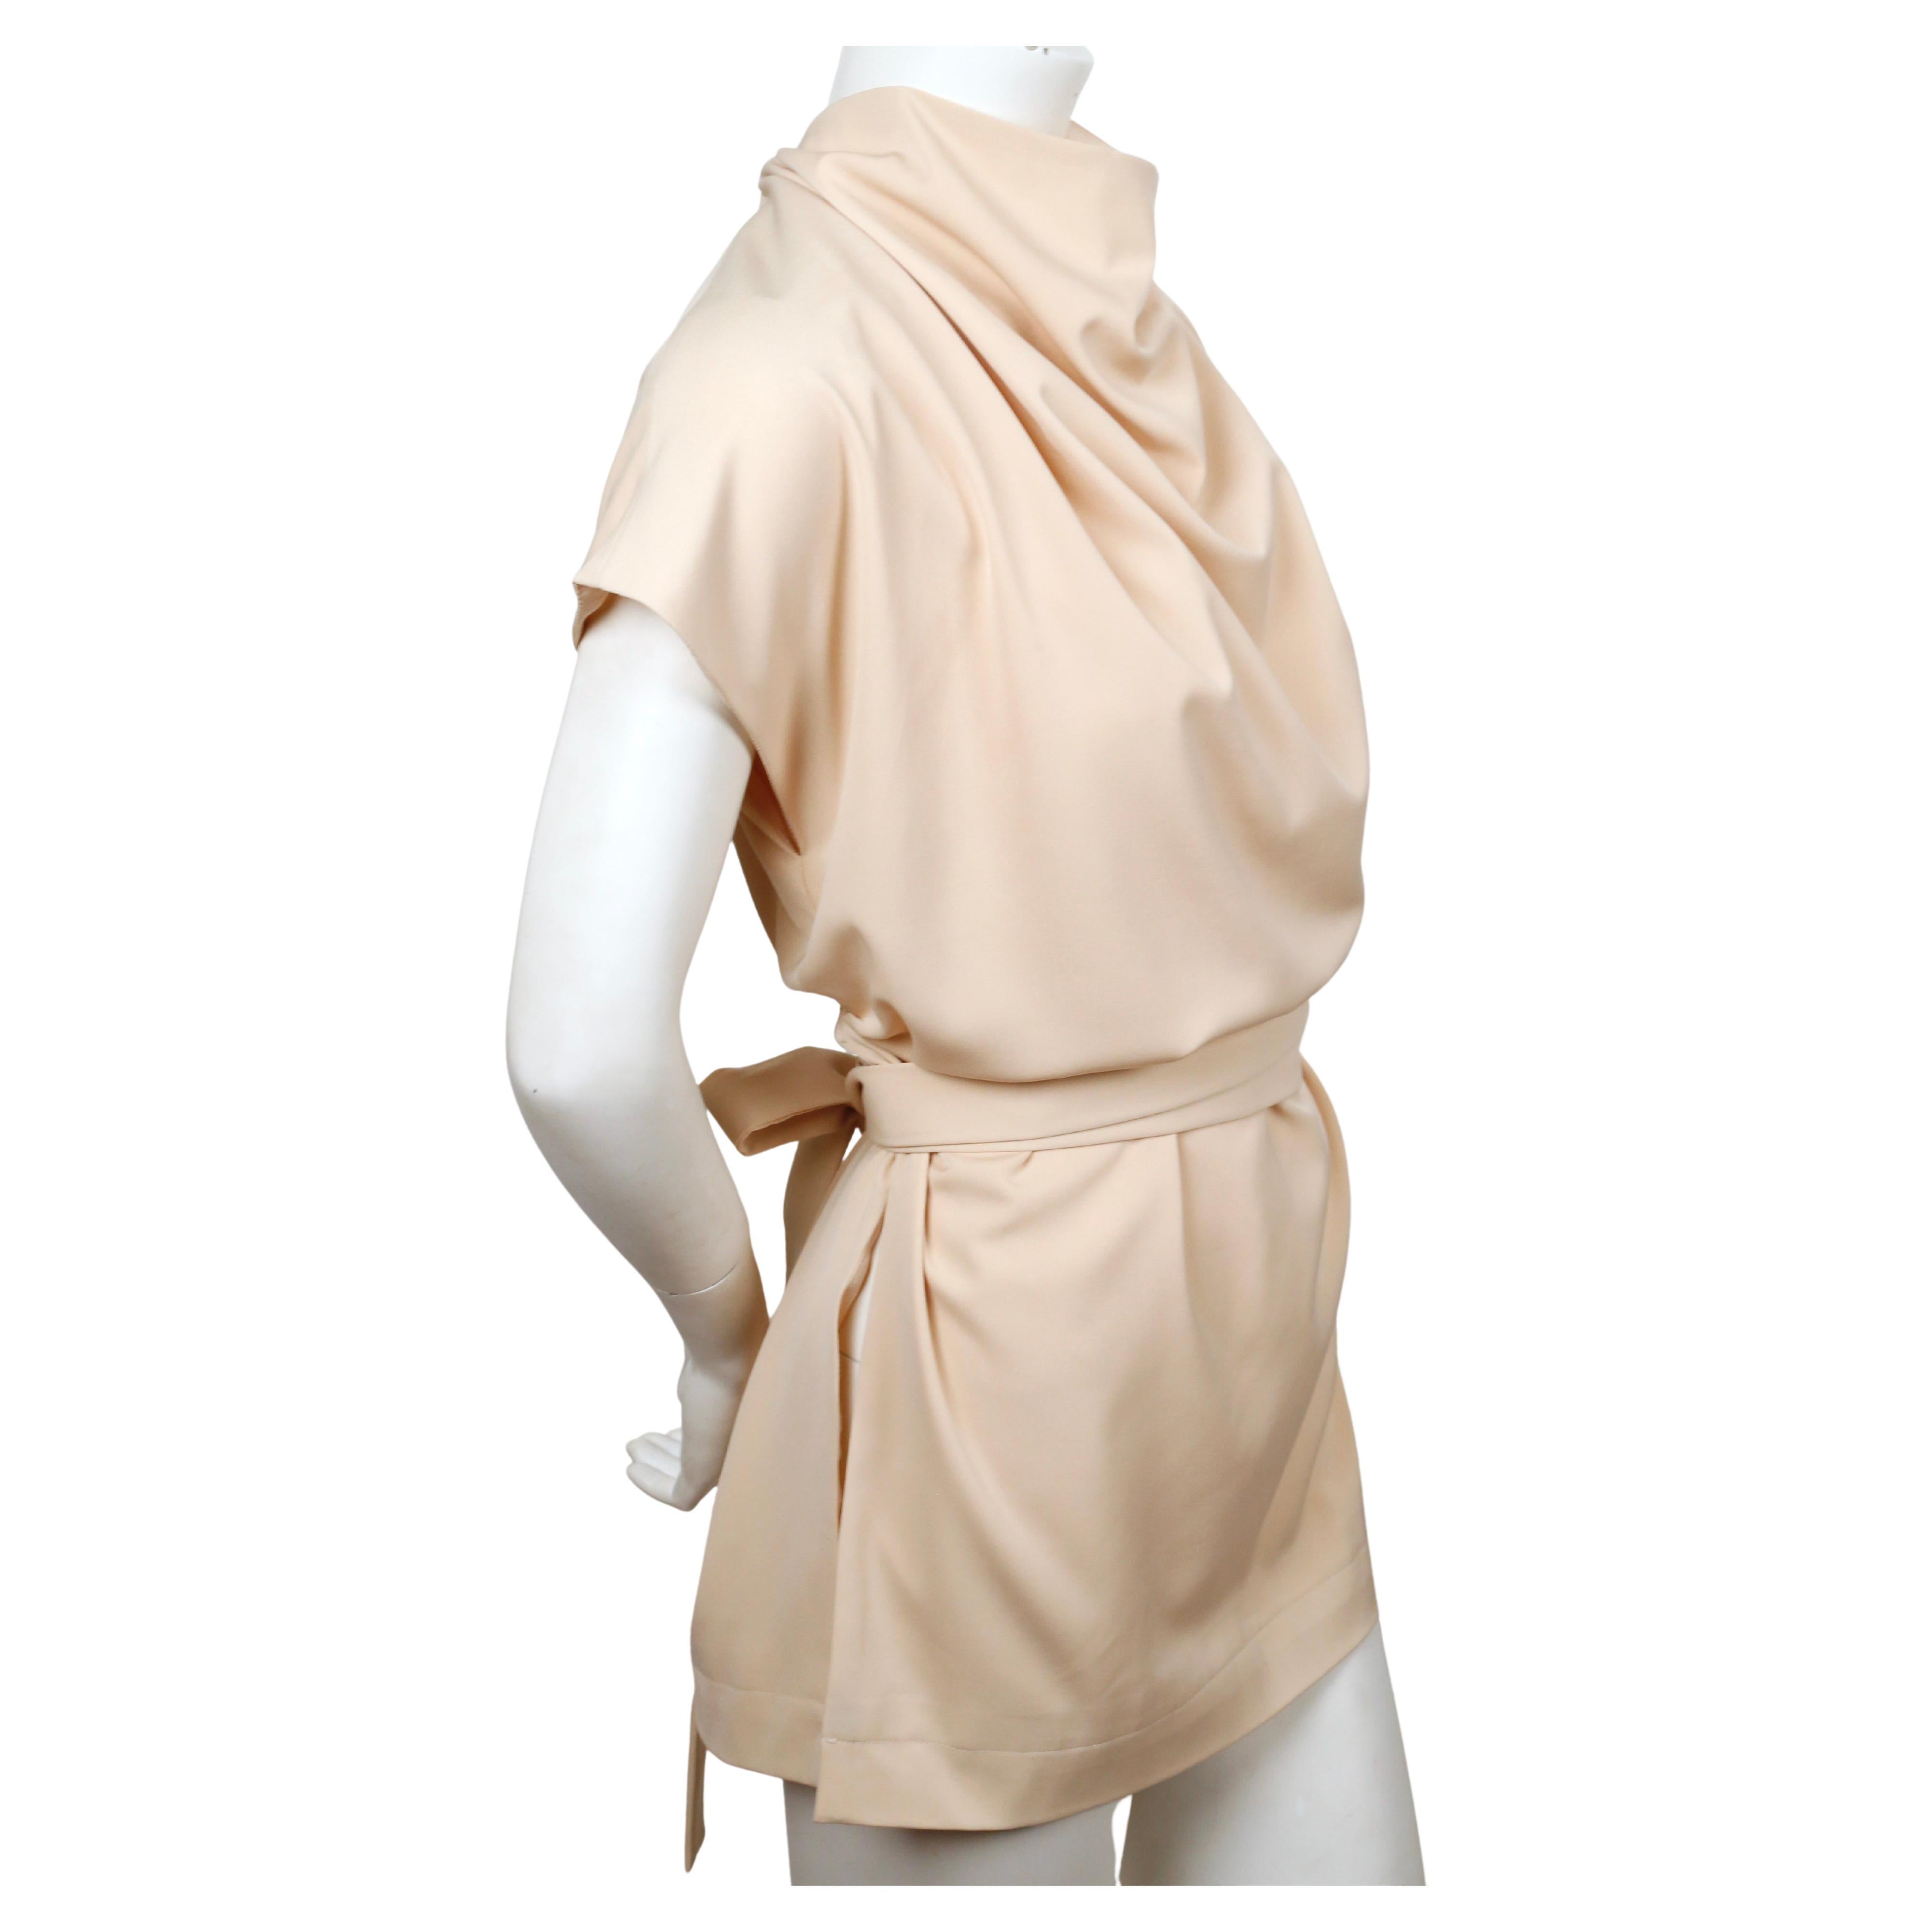 Draped, cream tunic with long ties designed by Phoebe Philo for Celine dating to 2015. No size label or fabric content label is present however this best fits a French 36-40. Approximate measurements: bust 45